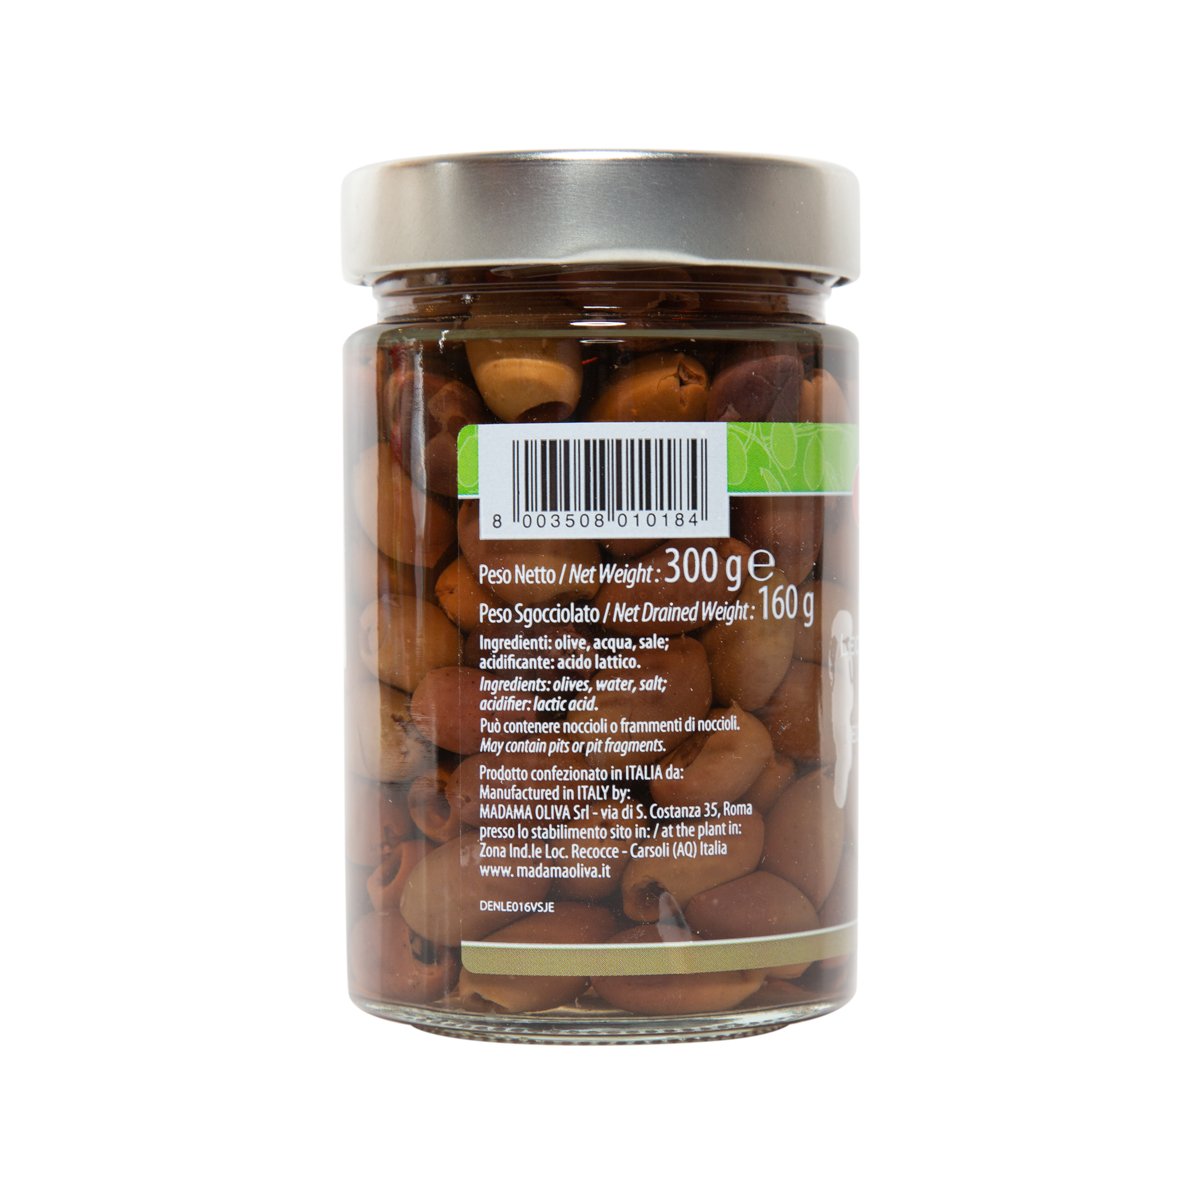 MADAMA OLIVA Black Pitted Leccino Olives in Brine (300g) – LOG ON